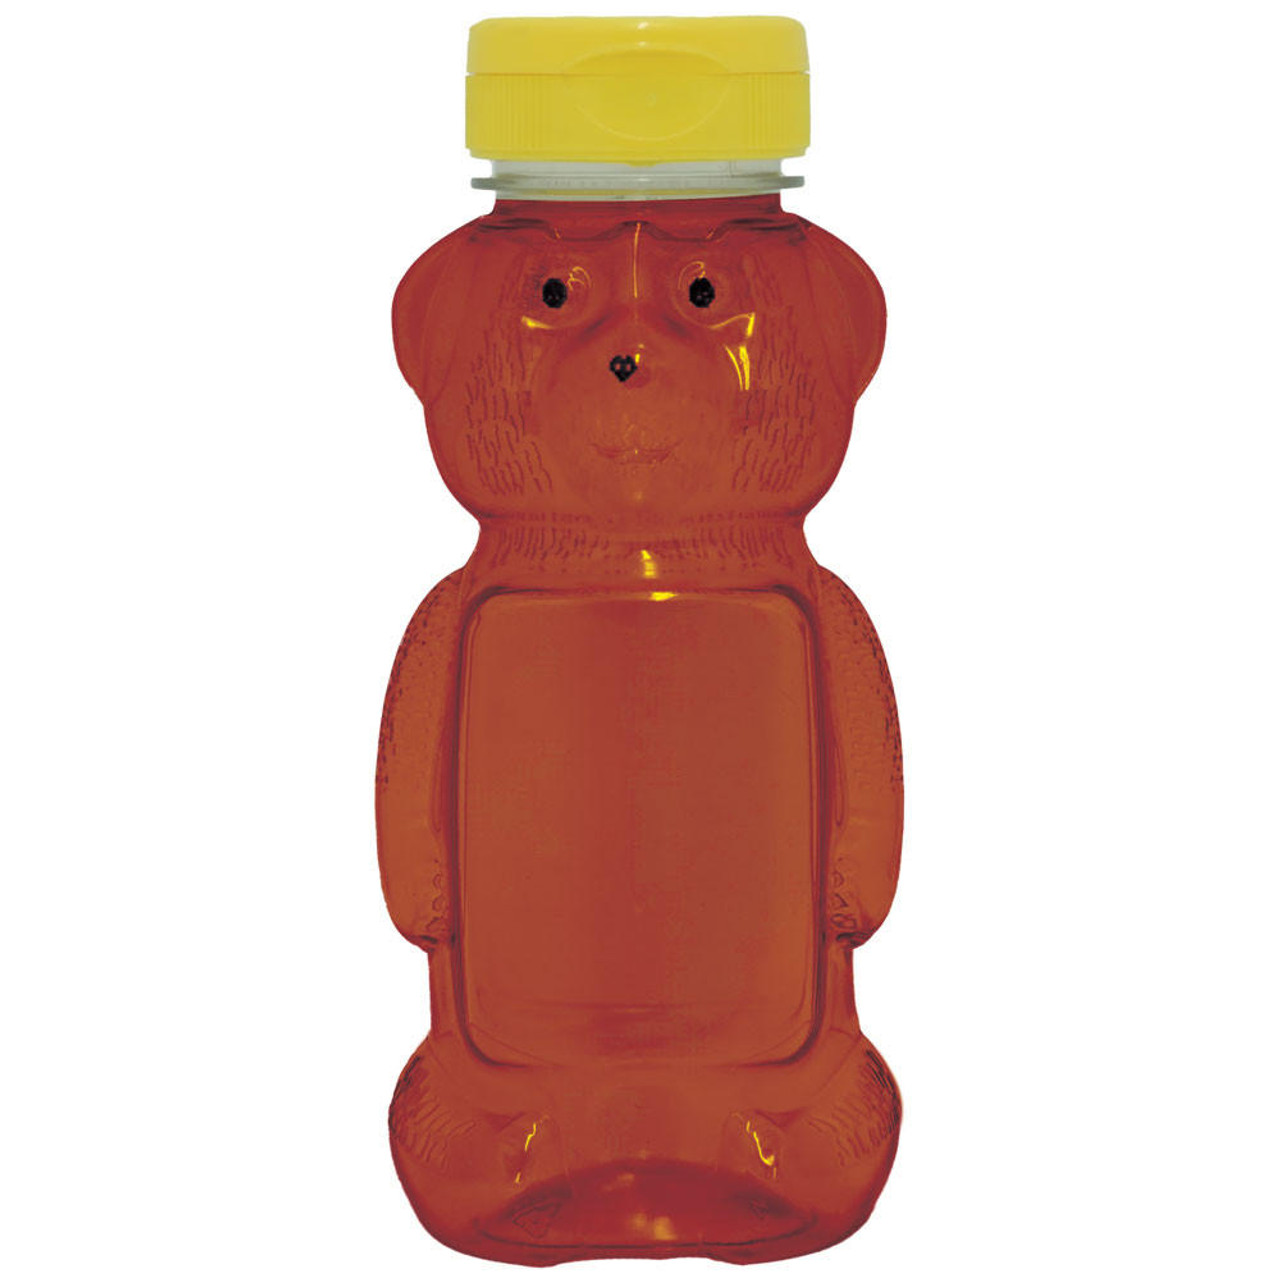 https://cdn11.bigcommerce.com/s-dhdy1goaa7/images/stencil/1280x1280/products/4471/6732/cn831-12-oz-plastic-bear-with-yellow-flip-top-lid__69756.1675884459.jpg?c=1